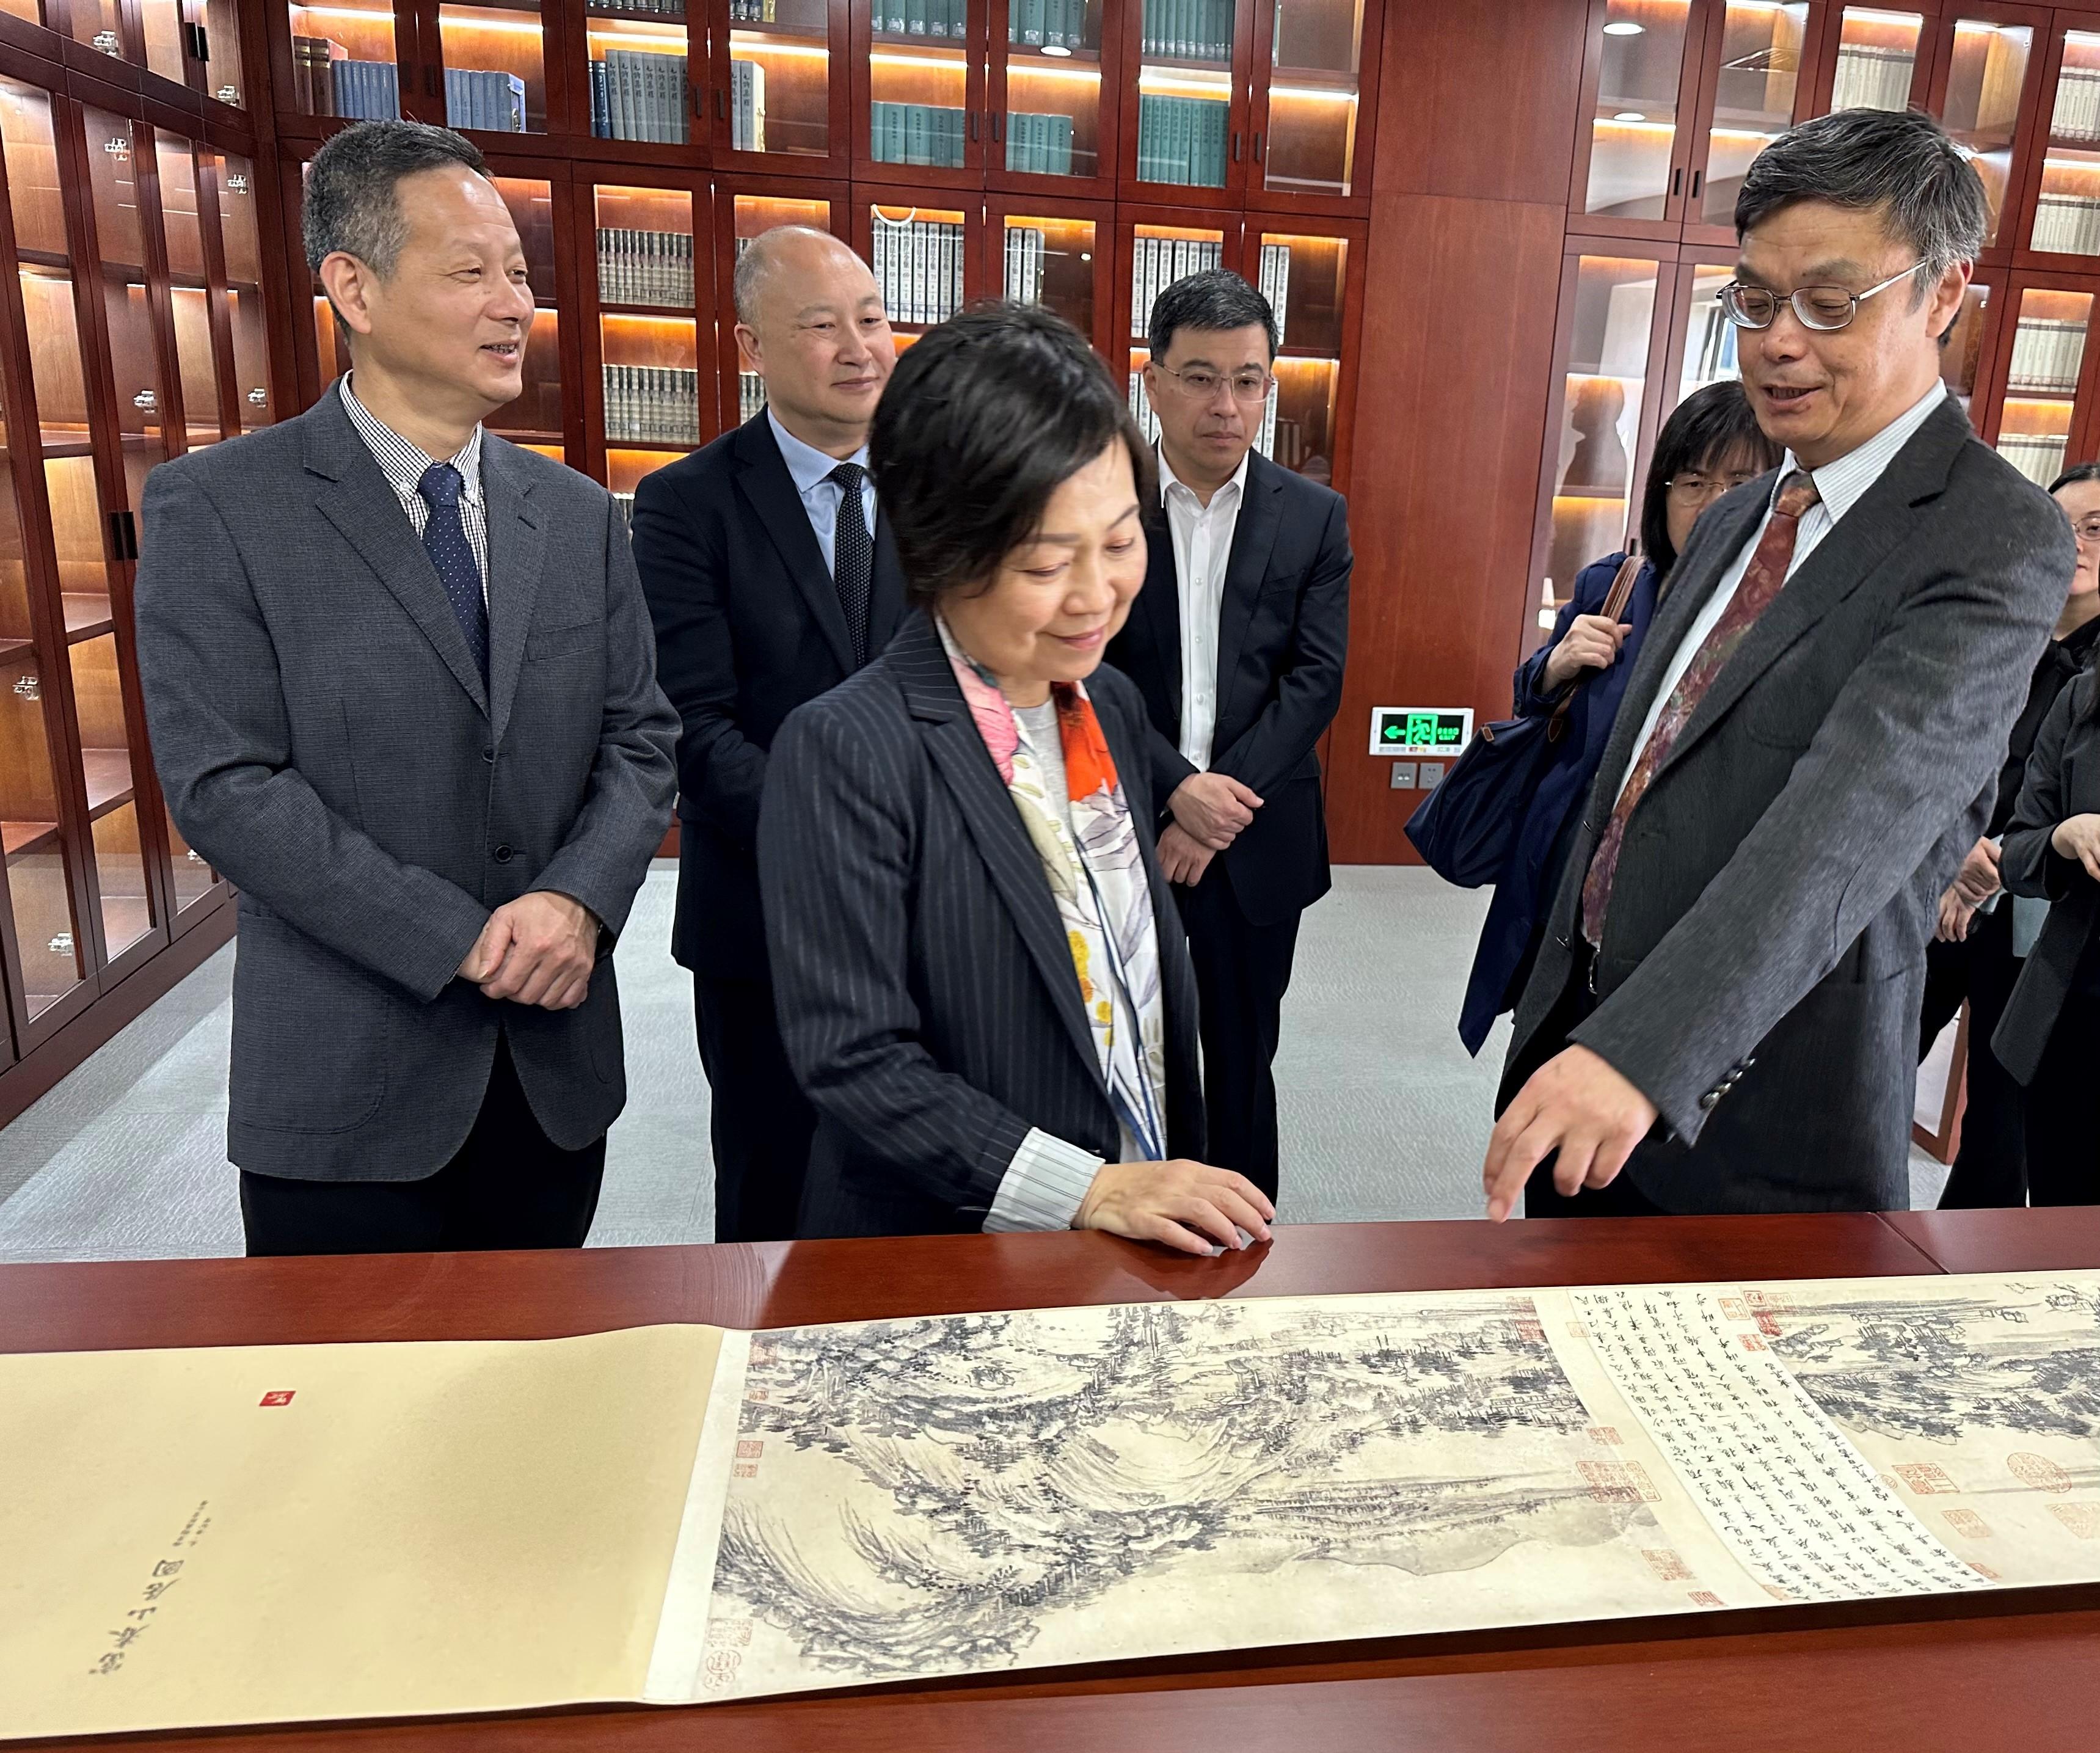 The Secretary for Education, Dr Choi Yuk-lin, yesterday (April 10) visited Zhejiang Shuren University. Photo shows Dr Choi (front row, left), accompanied by the President of Zhejiang Shuren University, Mr Li Lu (front row, right), touring the university.